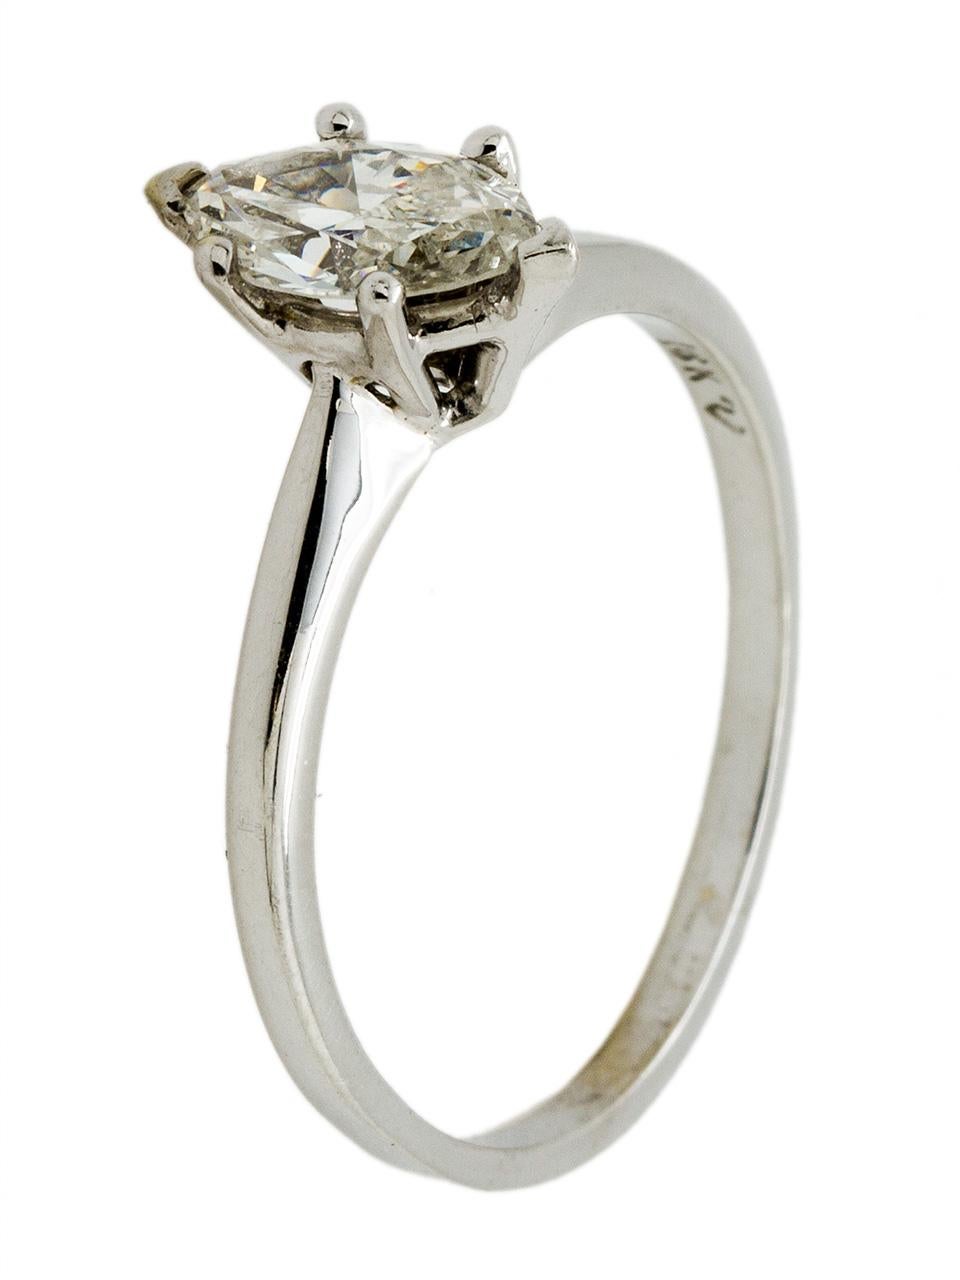 Lovely 18k white gold solitaire engagement ring with .58ct marquise cut center diamond, I color/SI1 clarity. Set in a classic 1960s mounting with a softly beveled shank, this timeless ring would be perfectly complimented by one of our vintage